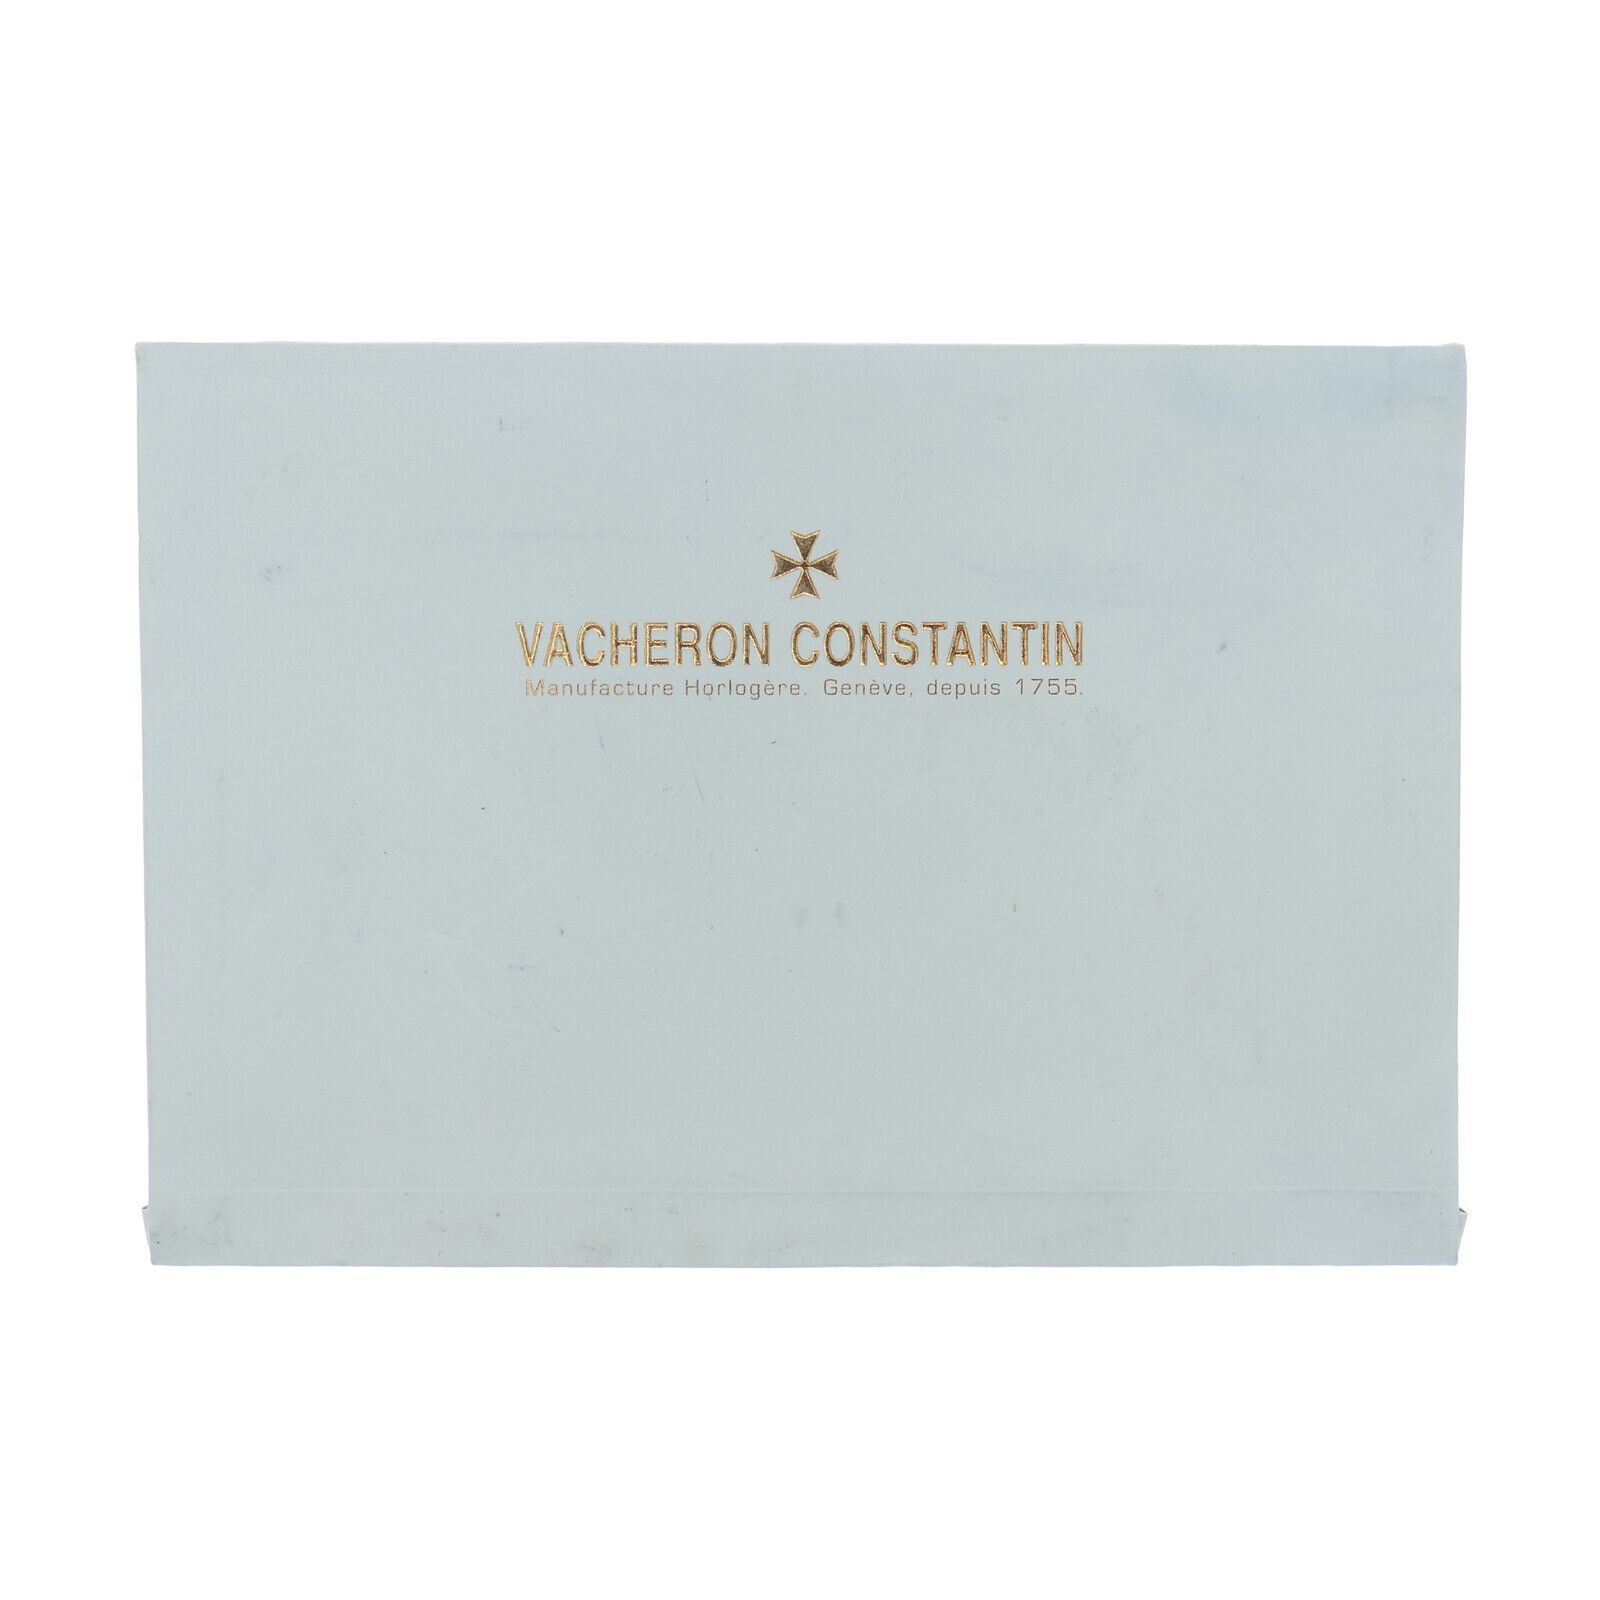 VACHERON CONSTANTIN EMPTY ENVELOPE FOR REFERENCE MODEL: 30669/000P-8953 PAPERS